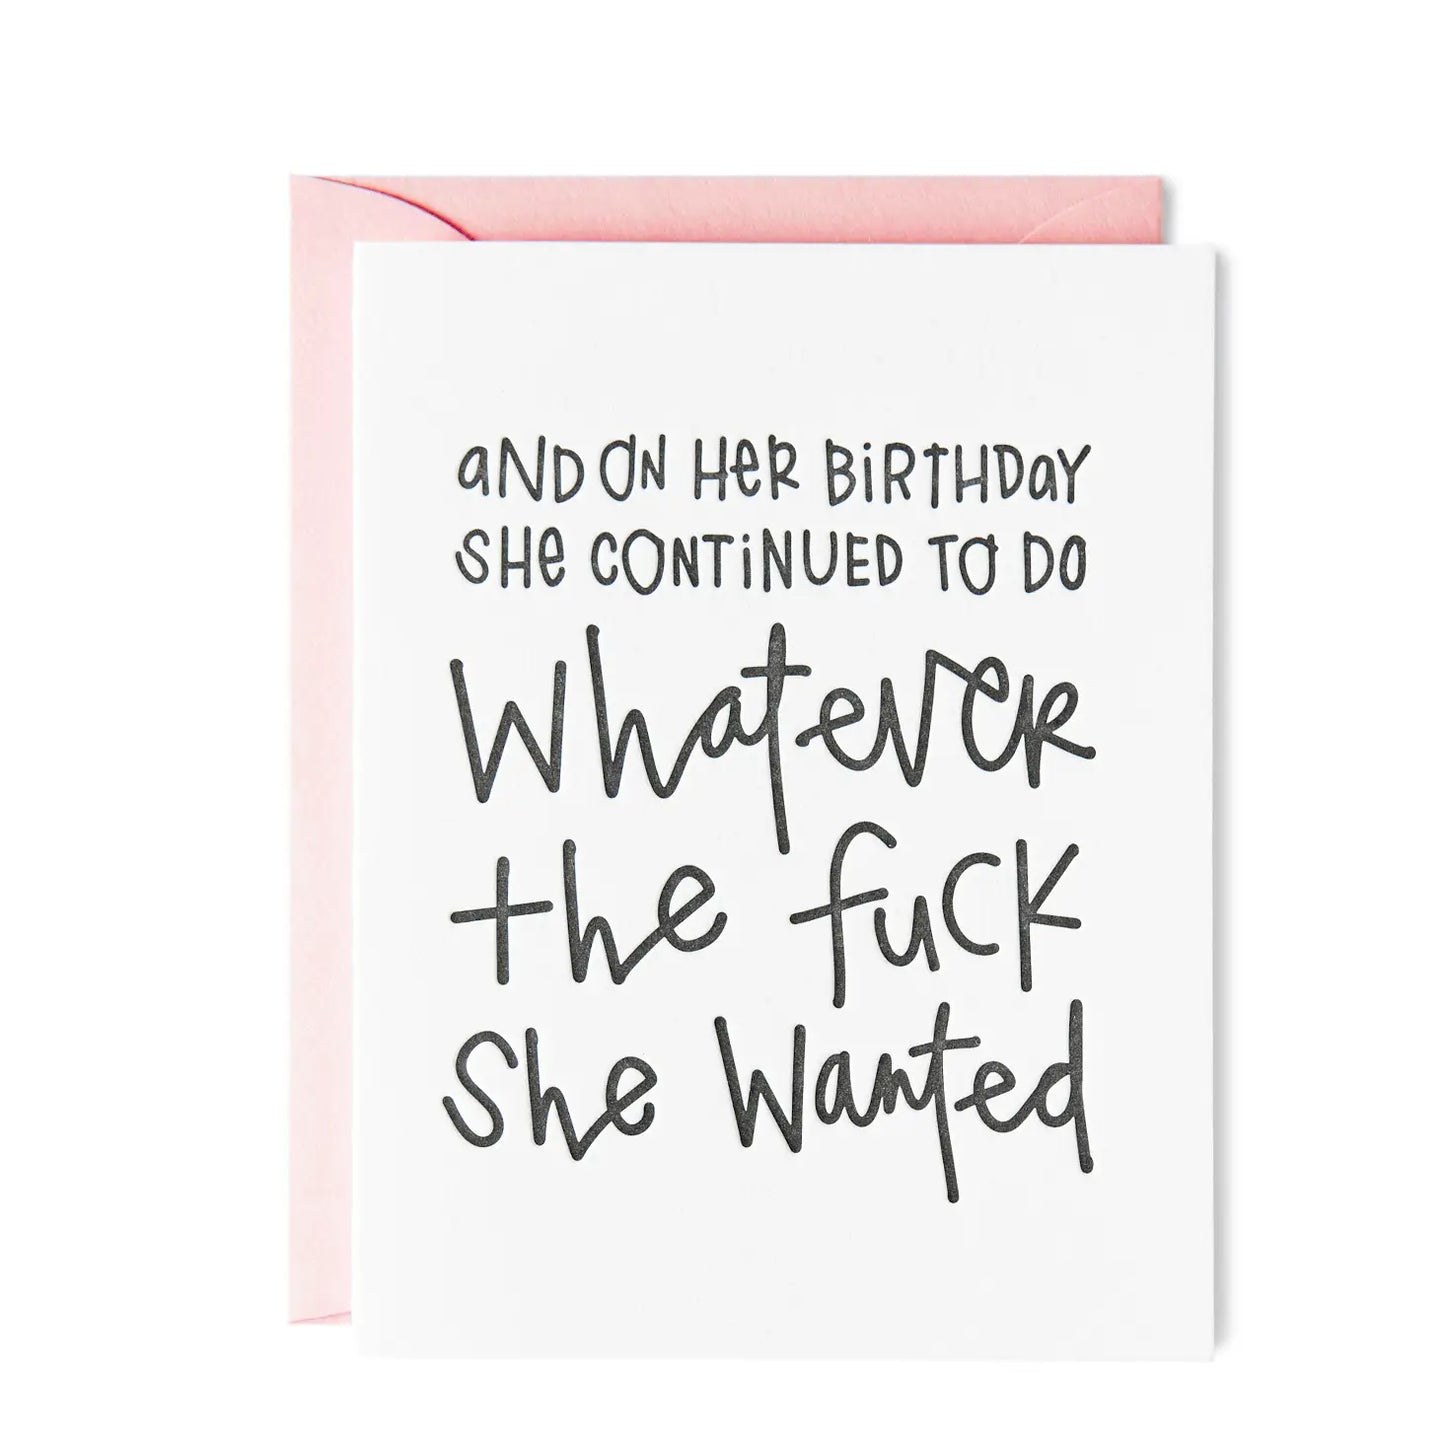 And On Her Birthday She Continued To Do Whatever The Fuck She Wanted Card